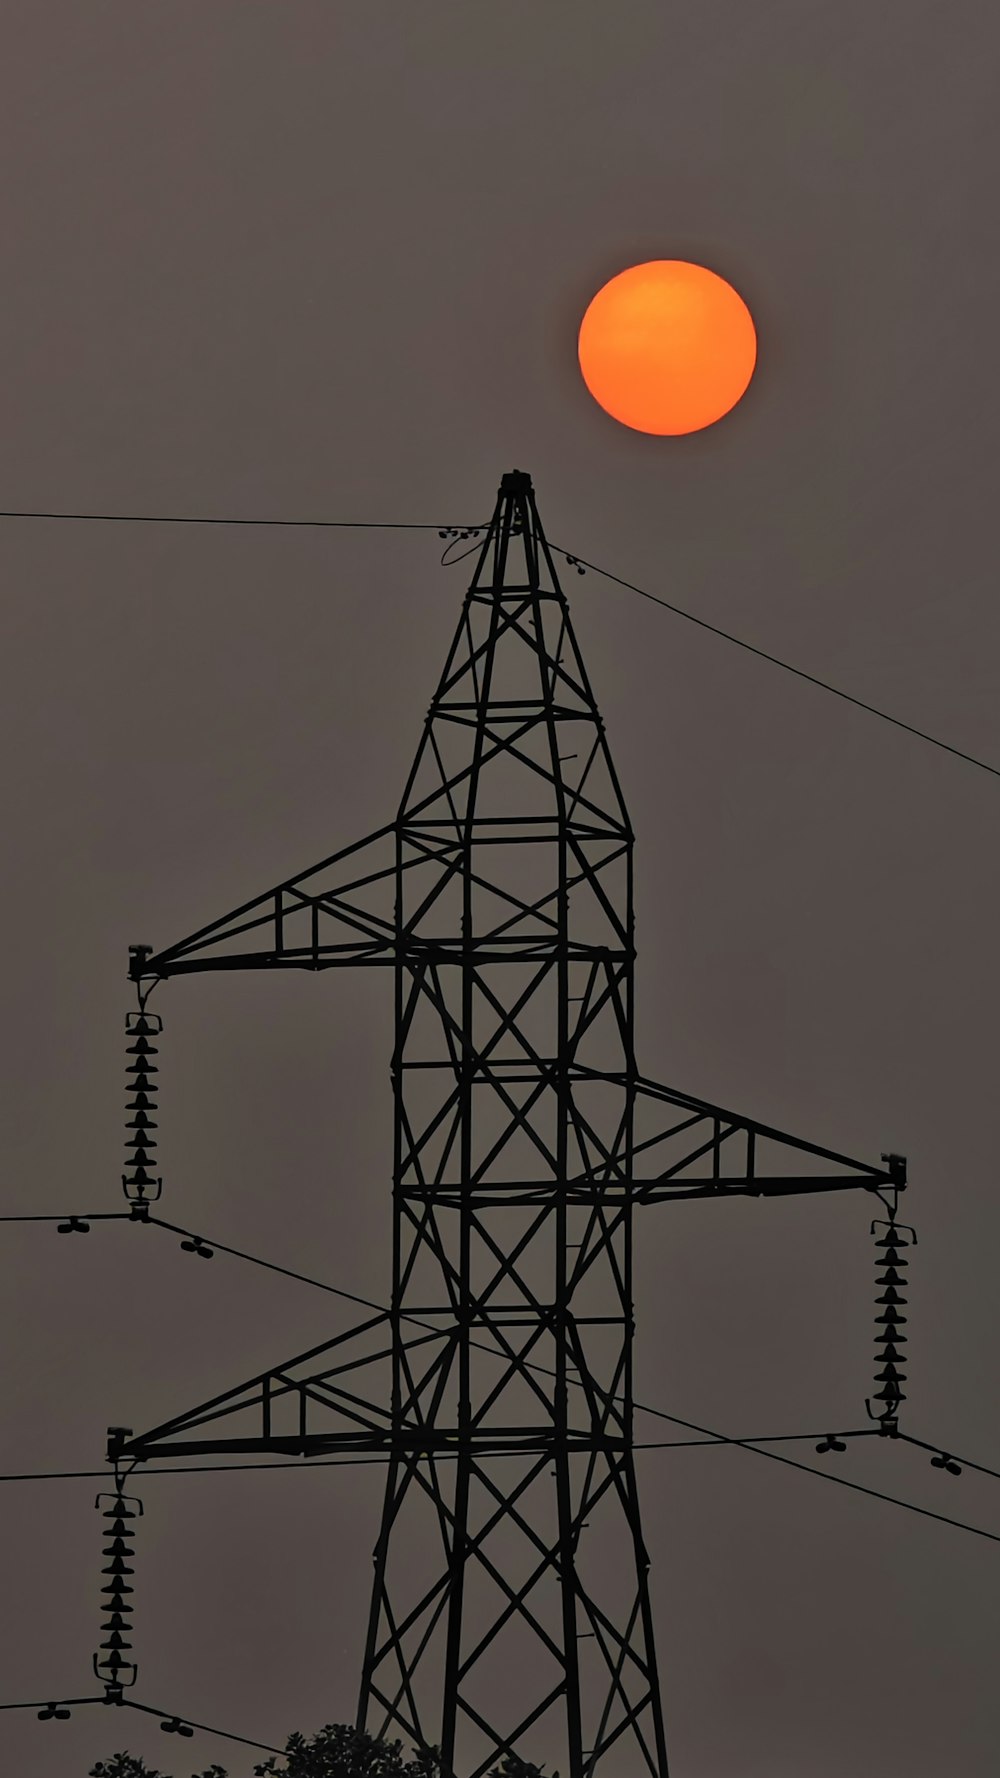 the sun is setting behind a power line